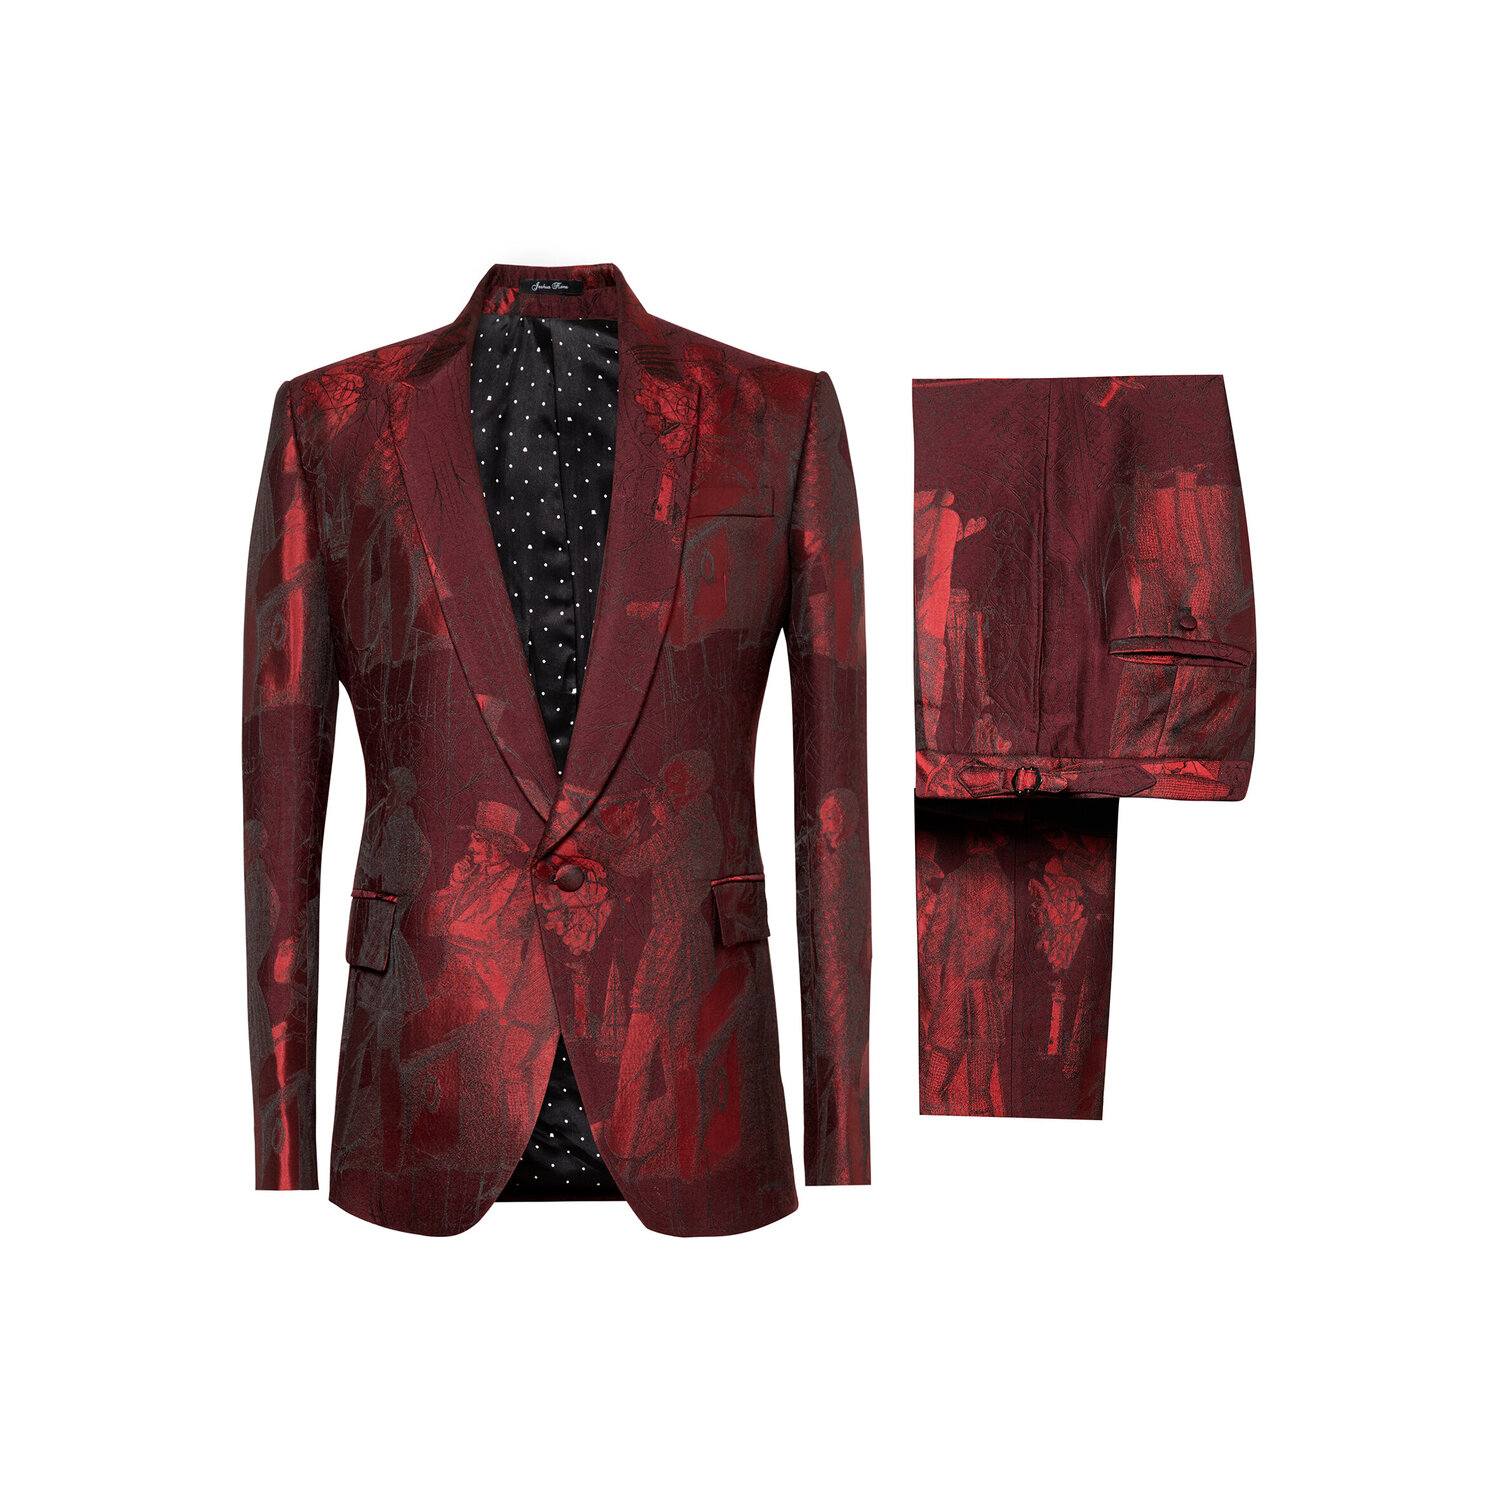 How to Get the Bloody Suit Texture